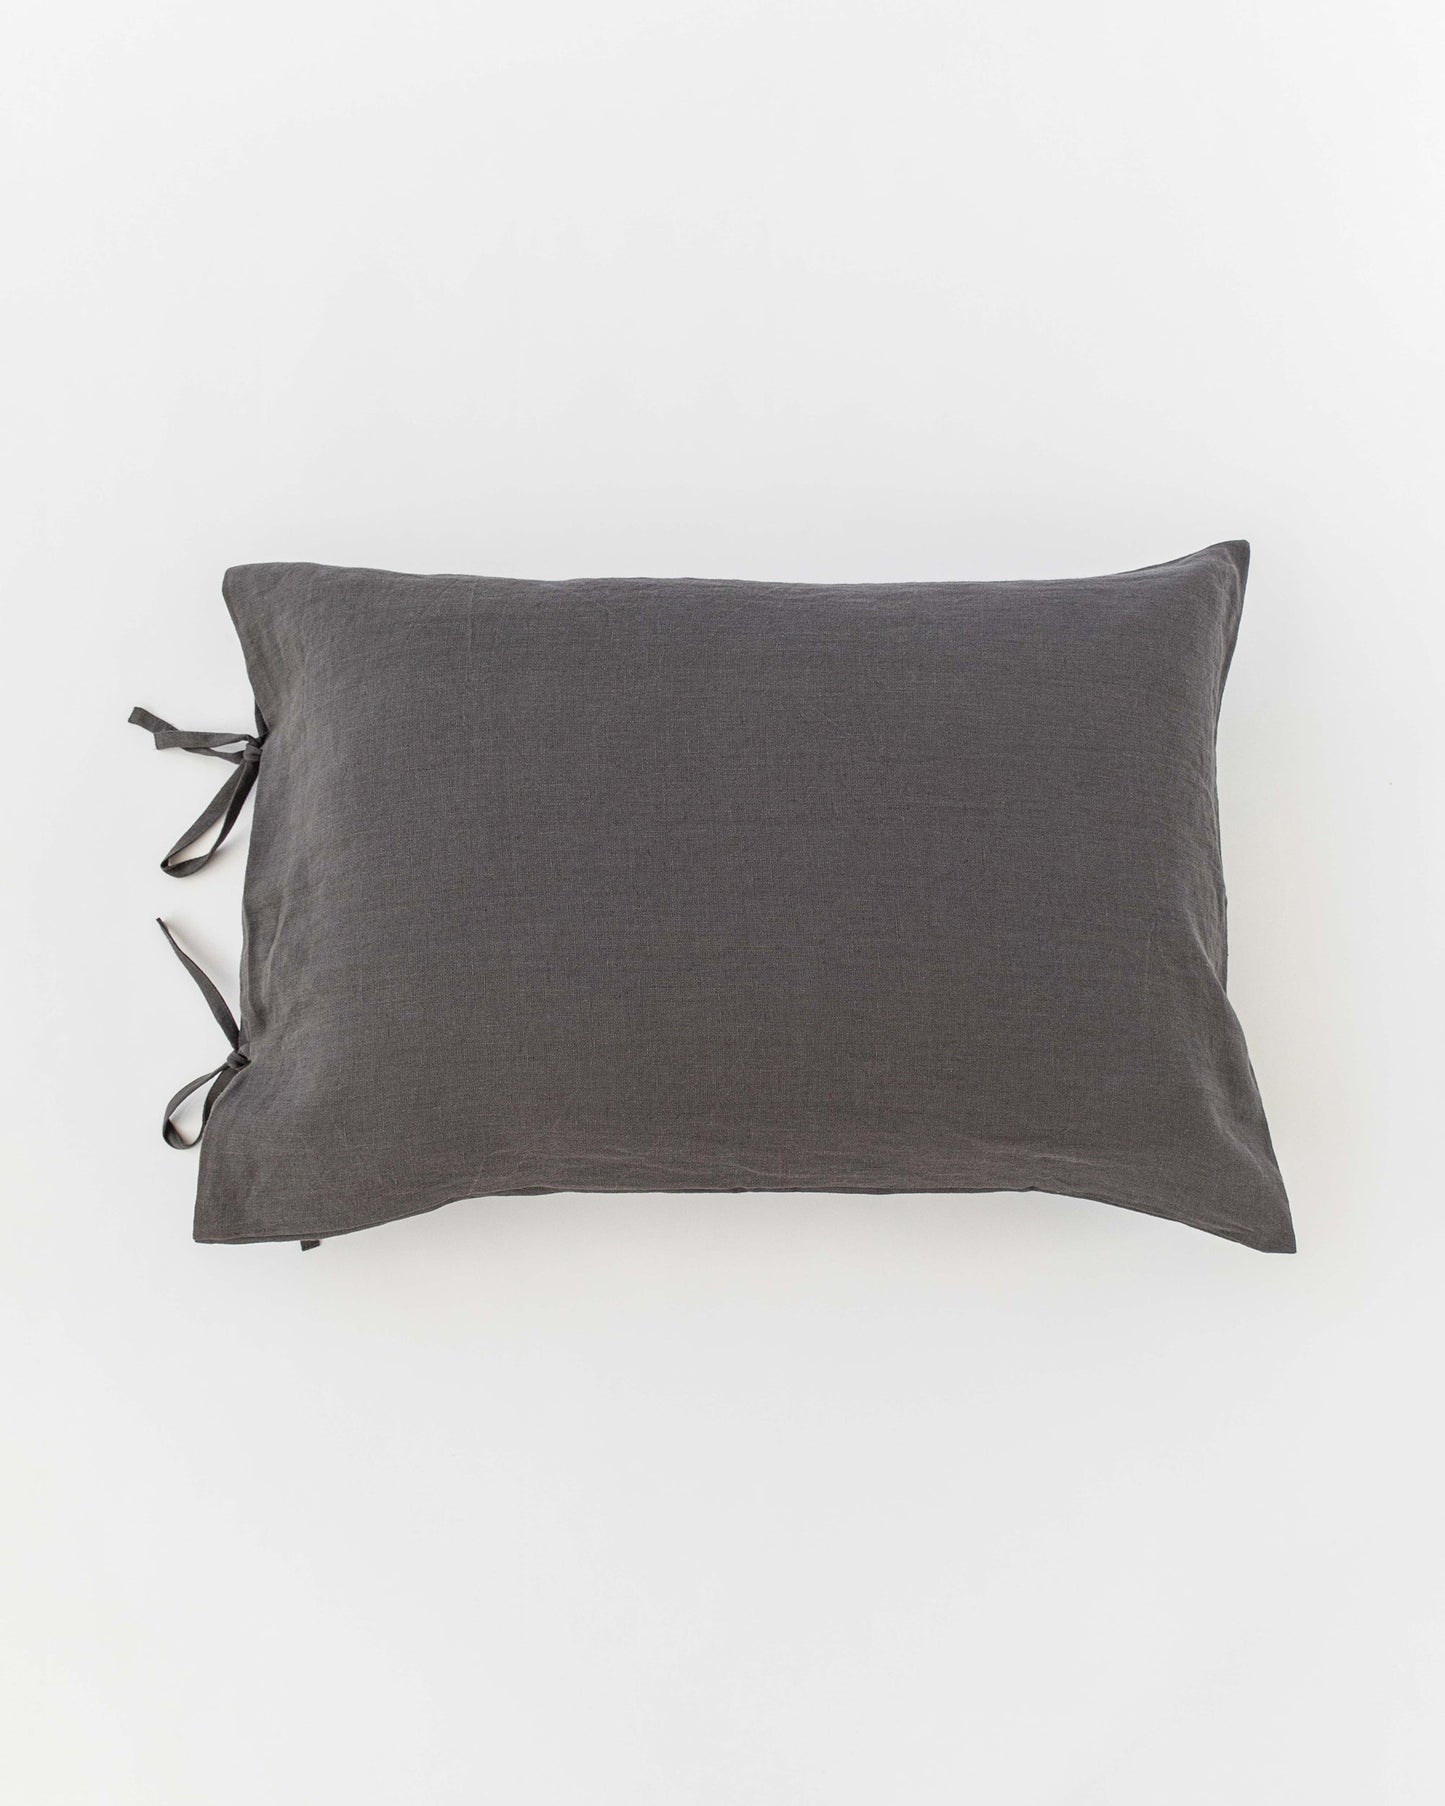 Linen pillowcase with ties in Charcoal gray - MagicLinen